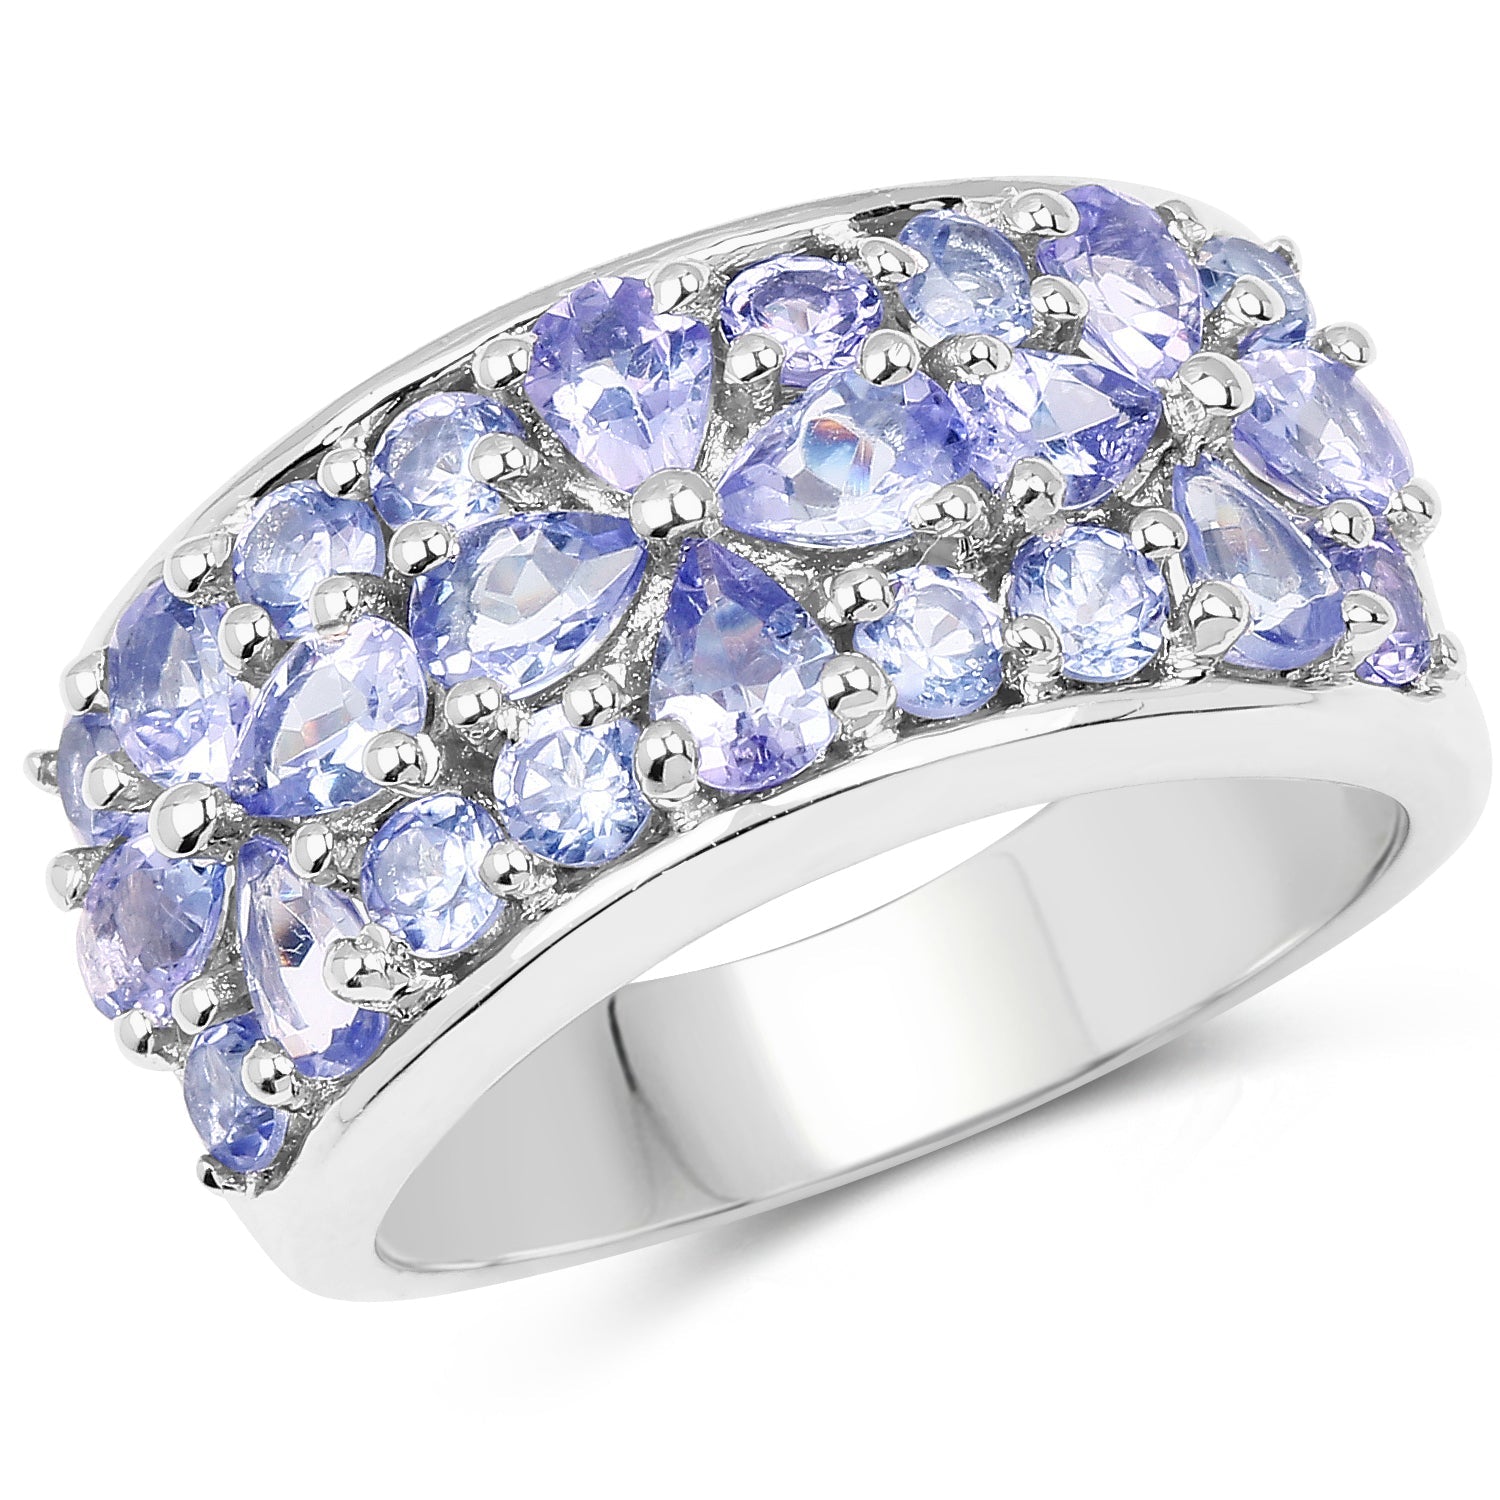 Genuine Tanzanite Cluster Ring in .925 Sterling Silver - 2.52 ctw Pear and Round Stones for Women, December Birthstone Bijou Her